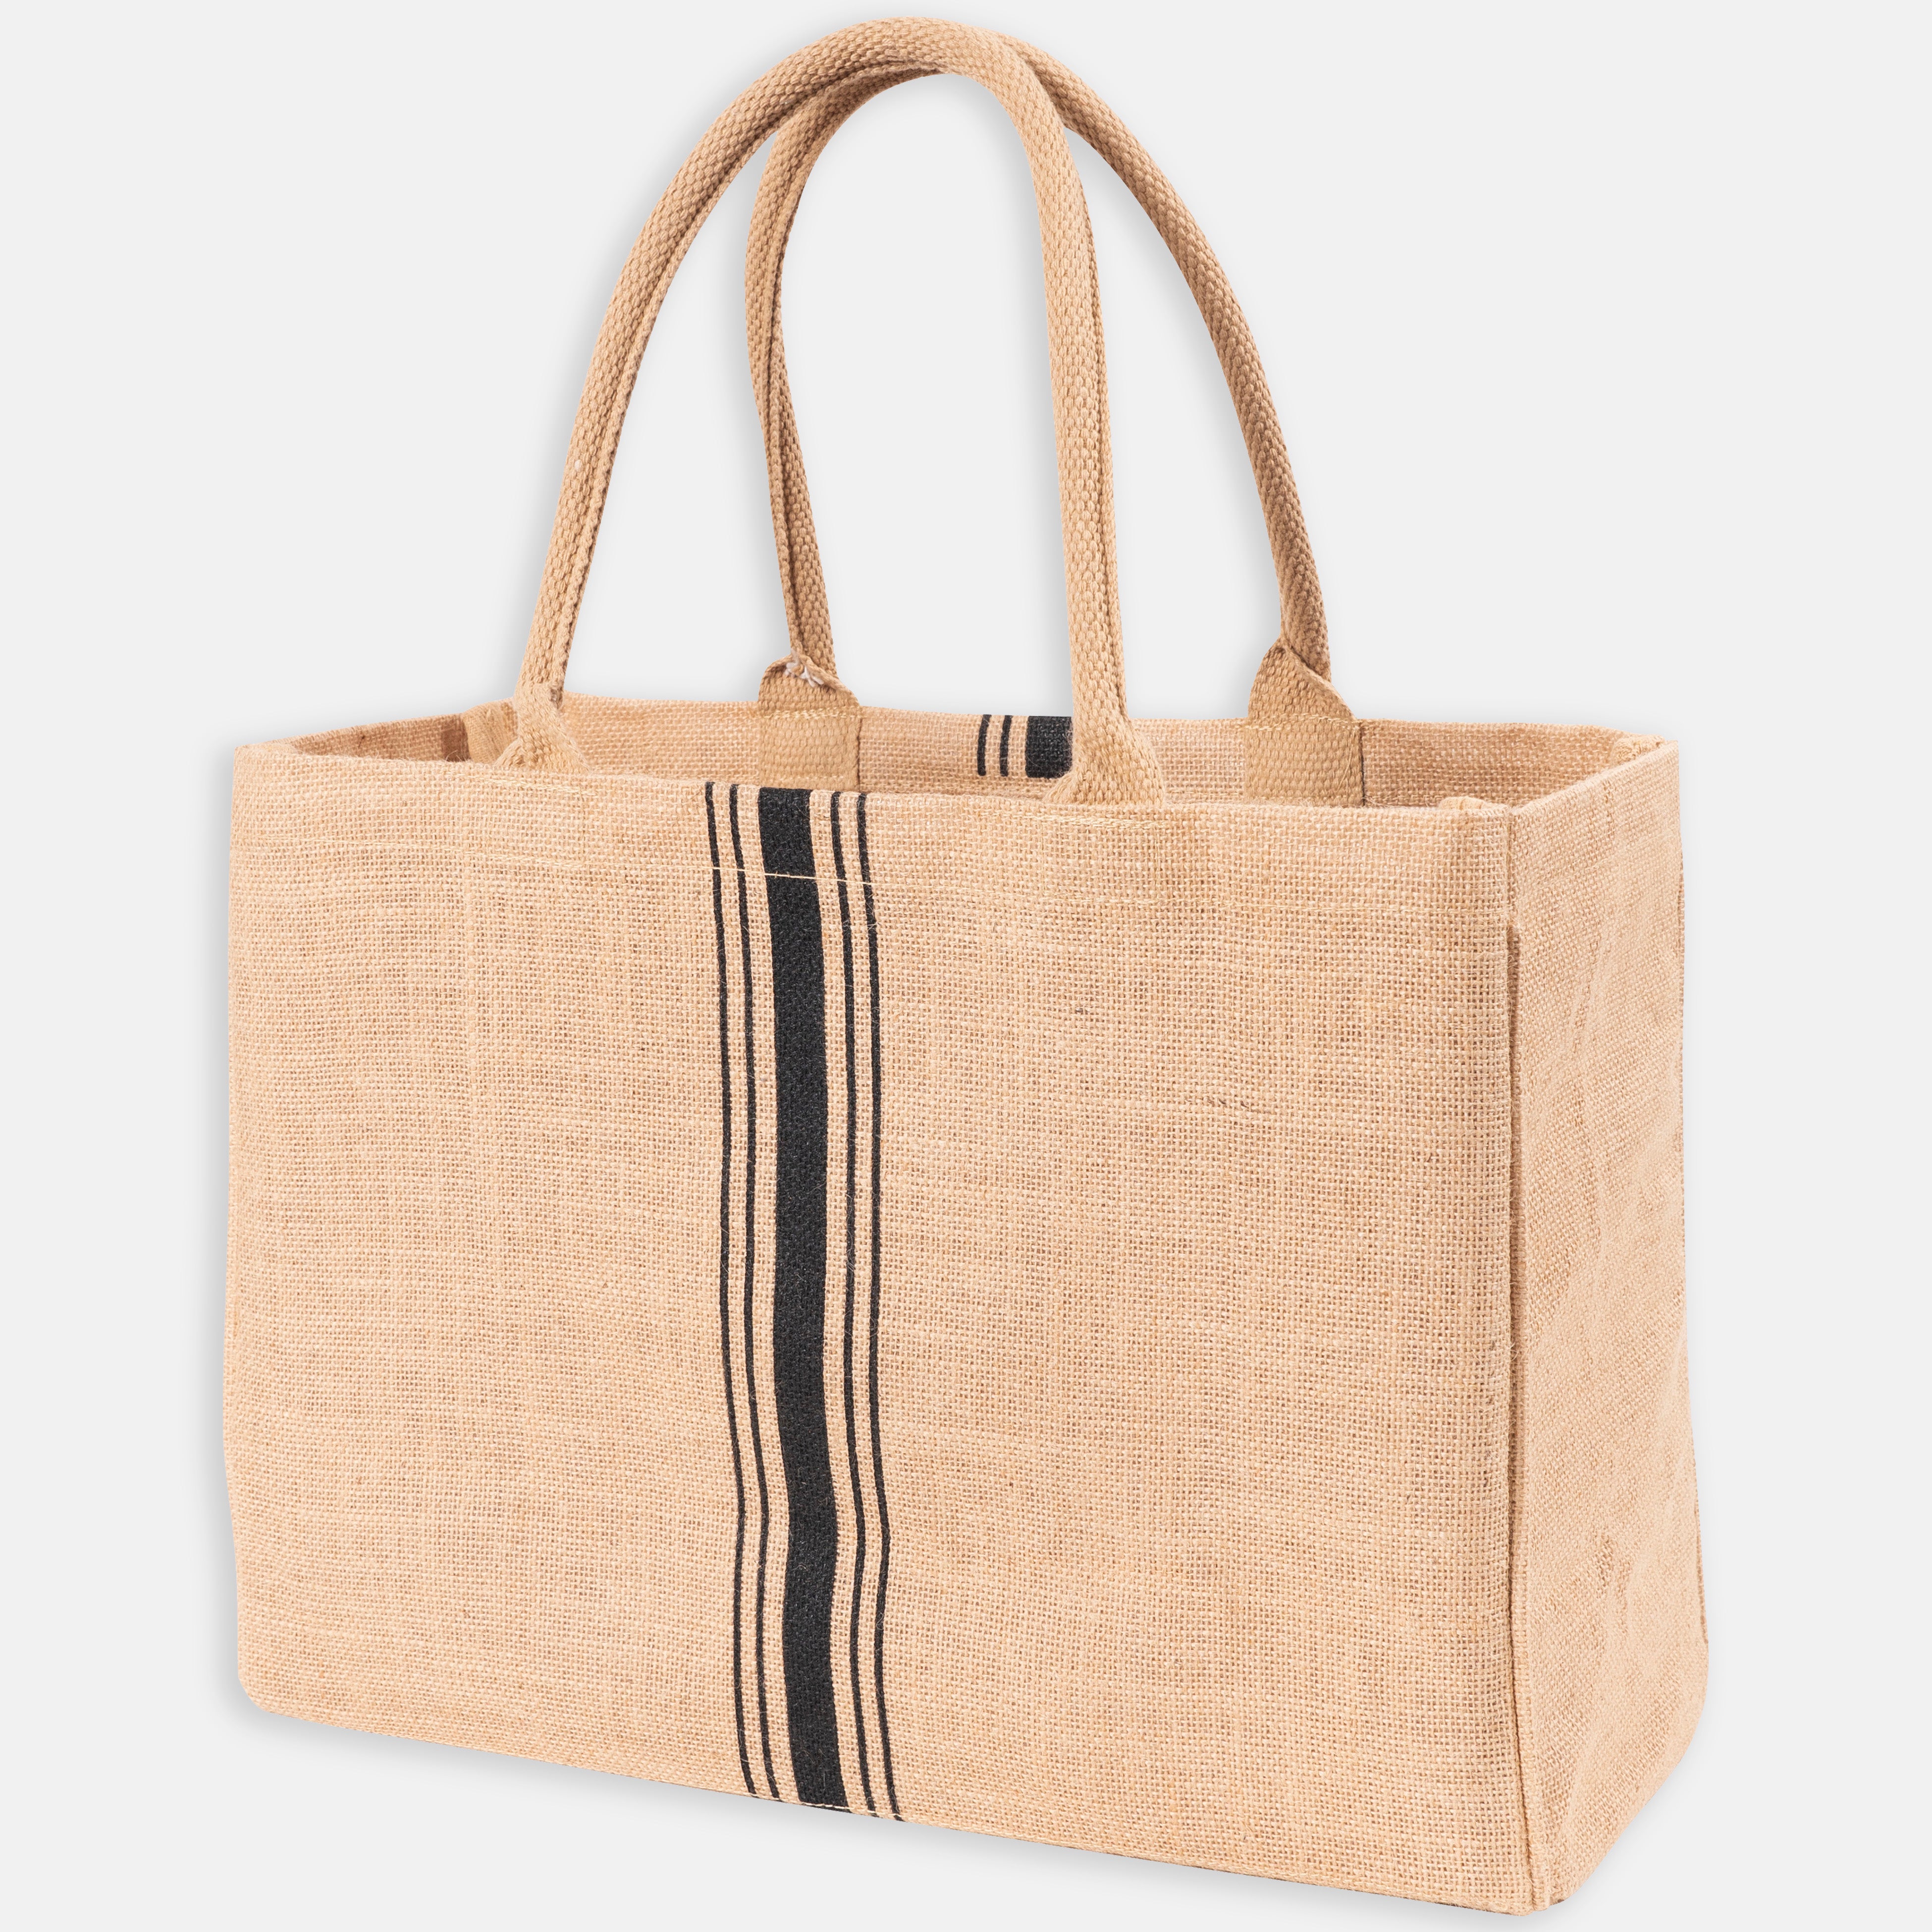 Buy LAXIS Jute Tote Bags with Handles, Handicraft Jute Bag S65 Natural  Tifin Bag Blank Large Burlap Reusable, Grocery Bags, Water Resistant for  Bridesmaid Gift Travel Shopping DIY Crafts Bags (Pack of